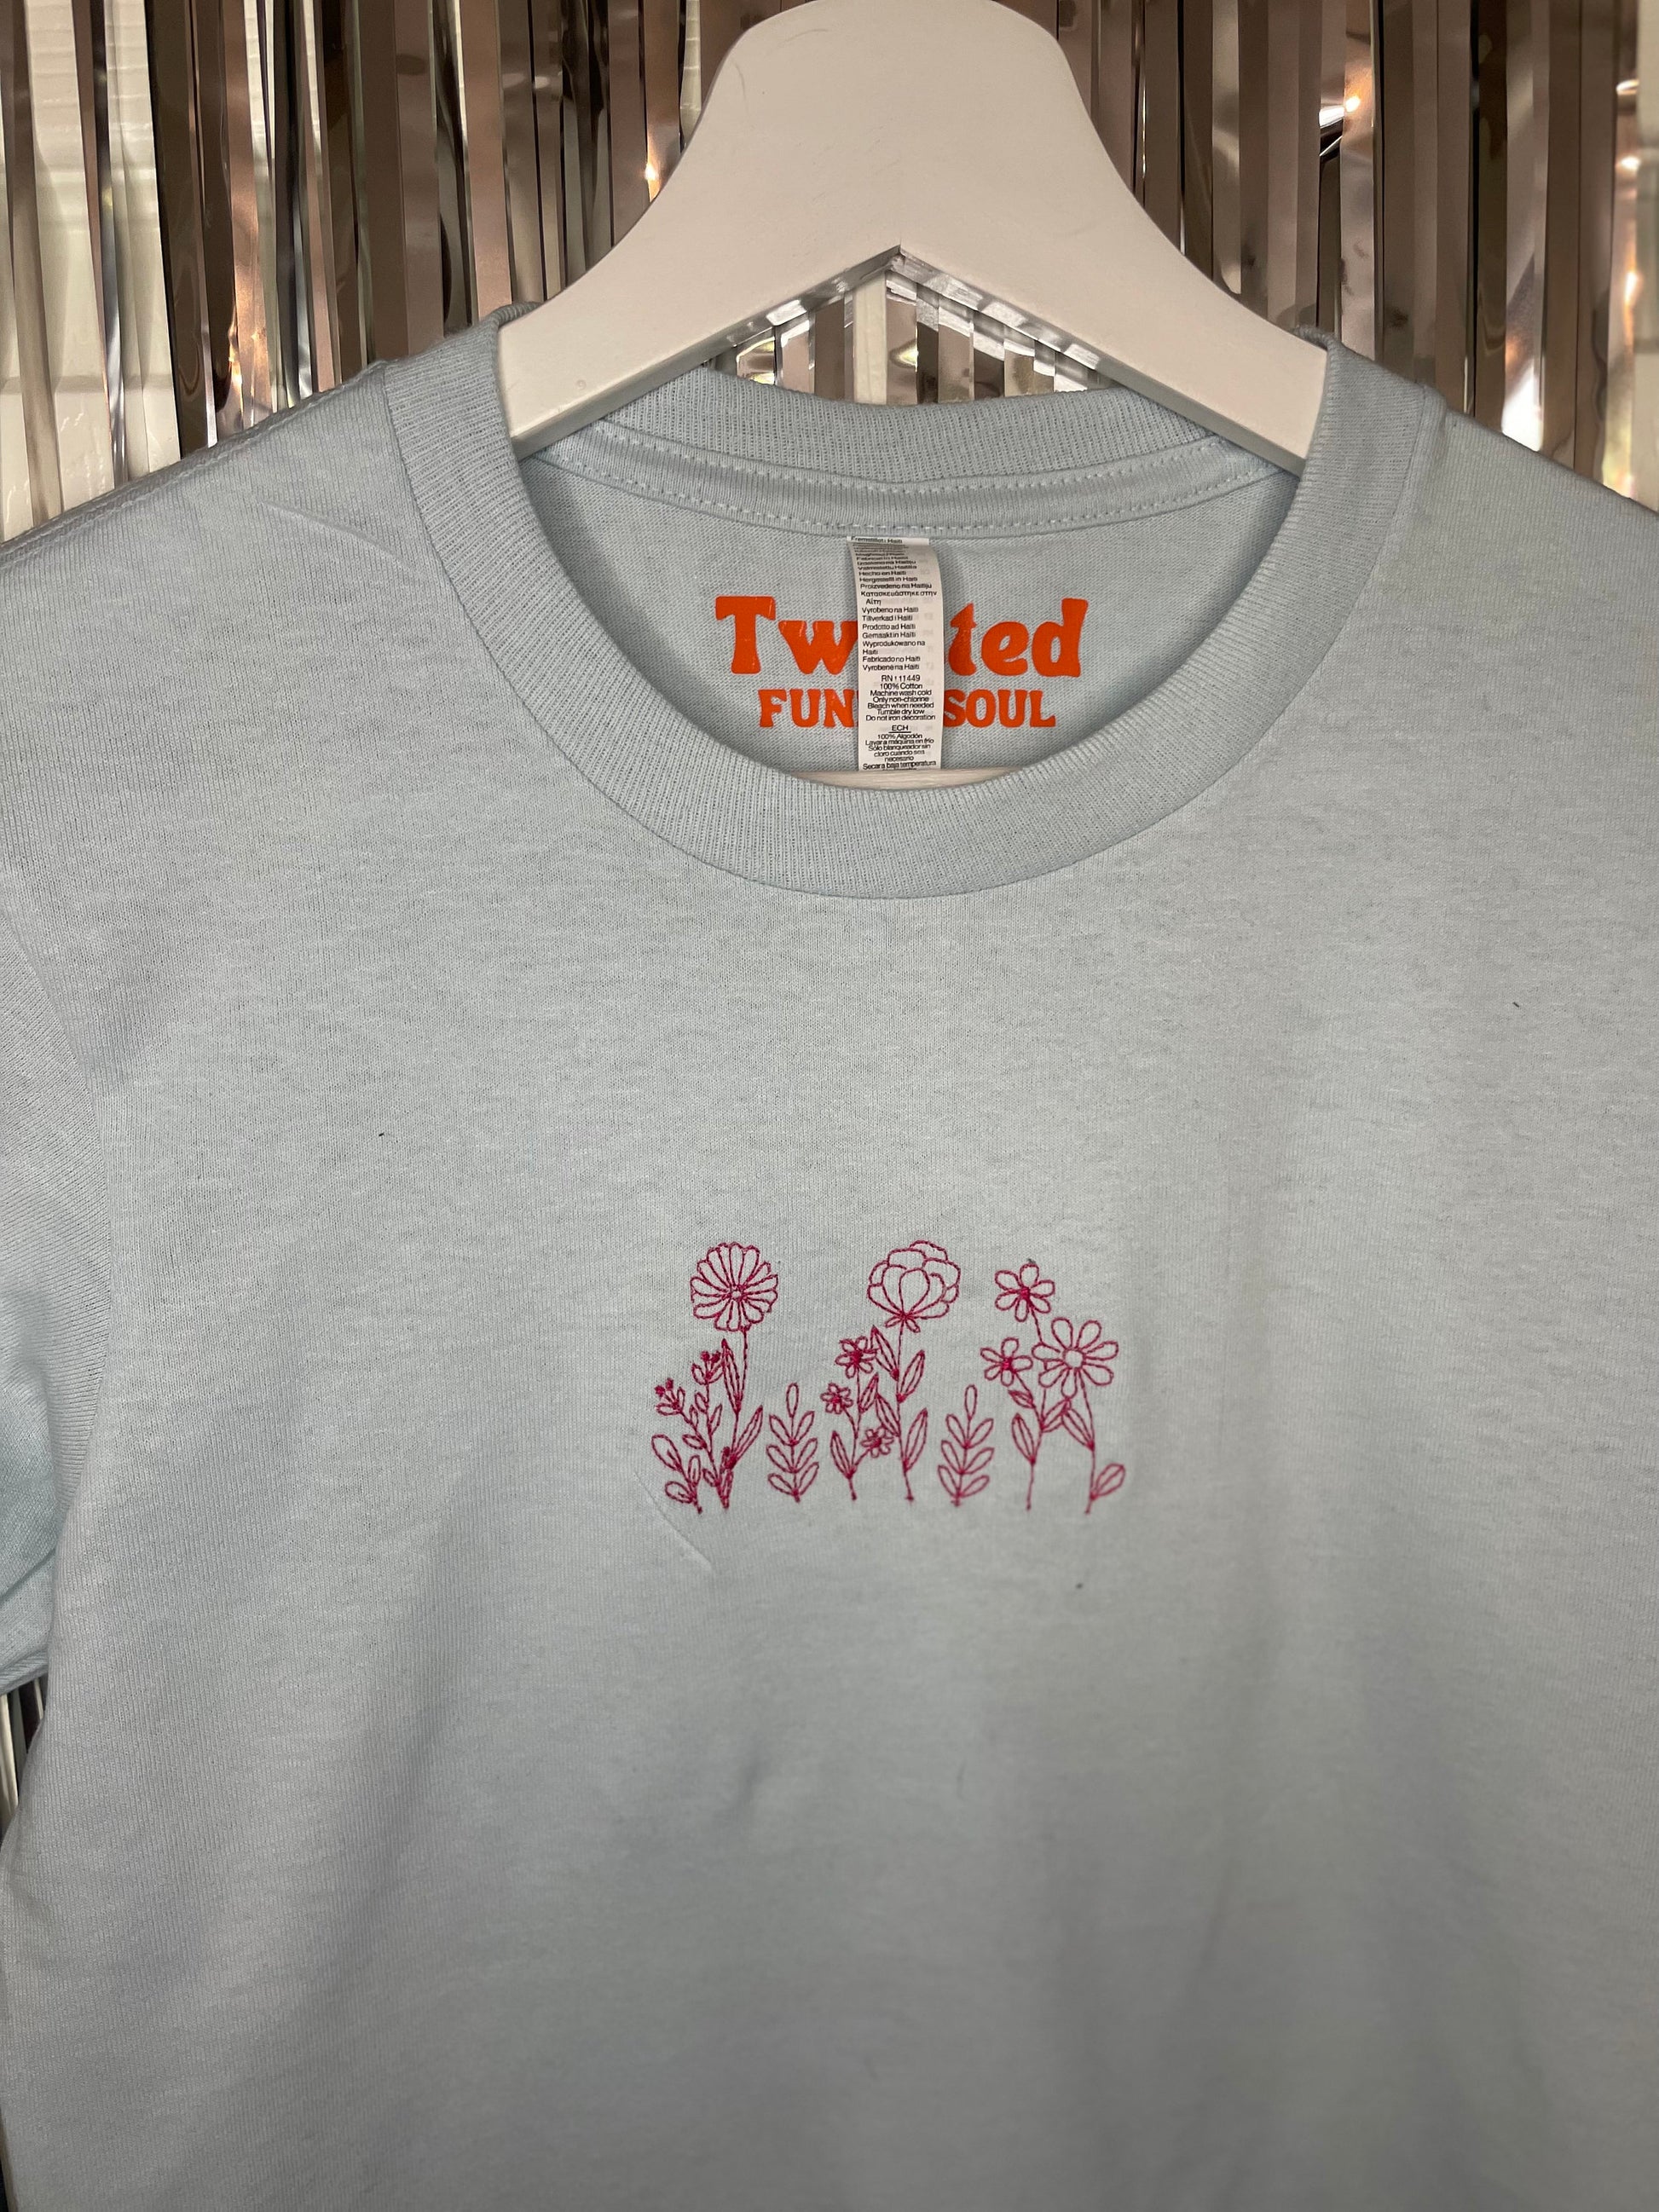 Wildflowers Embroidered Crew Neck T-shirt, Unisex tshirt, Gardening, Floral Embroidery, Botanical Gift, Flower Aesthetic, Plant Lady Shirt